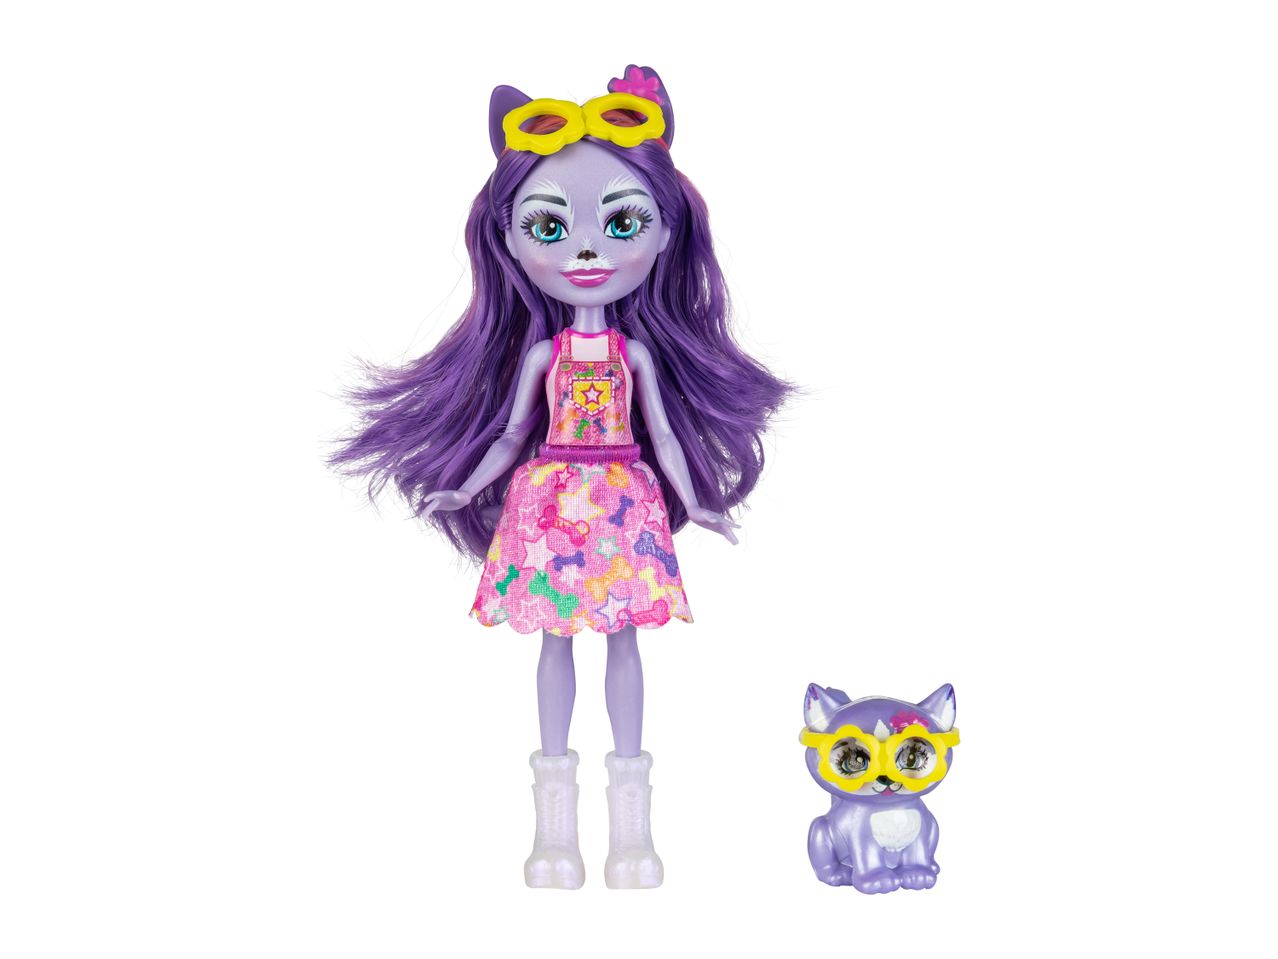 Go to full screen view: Enchantimals Doll - Image 15